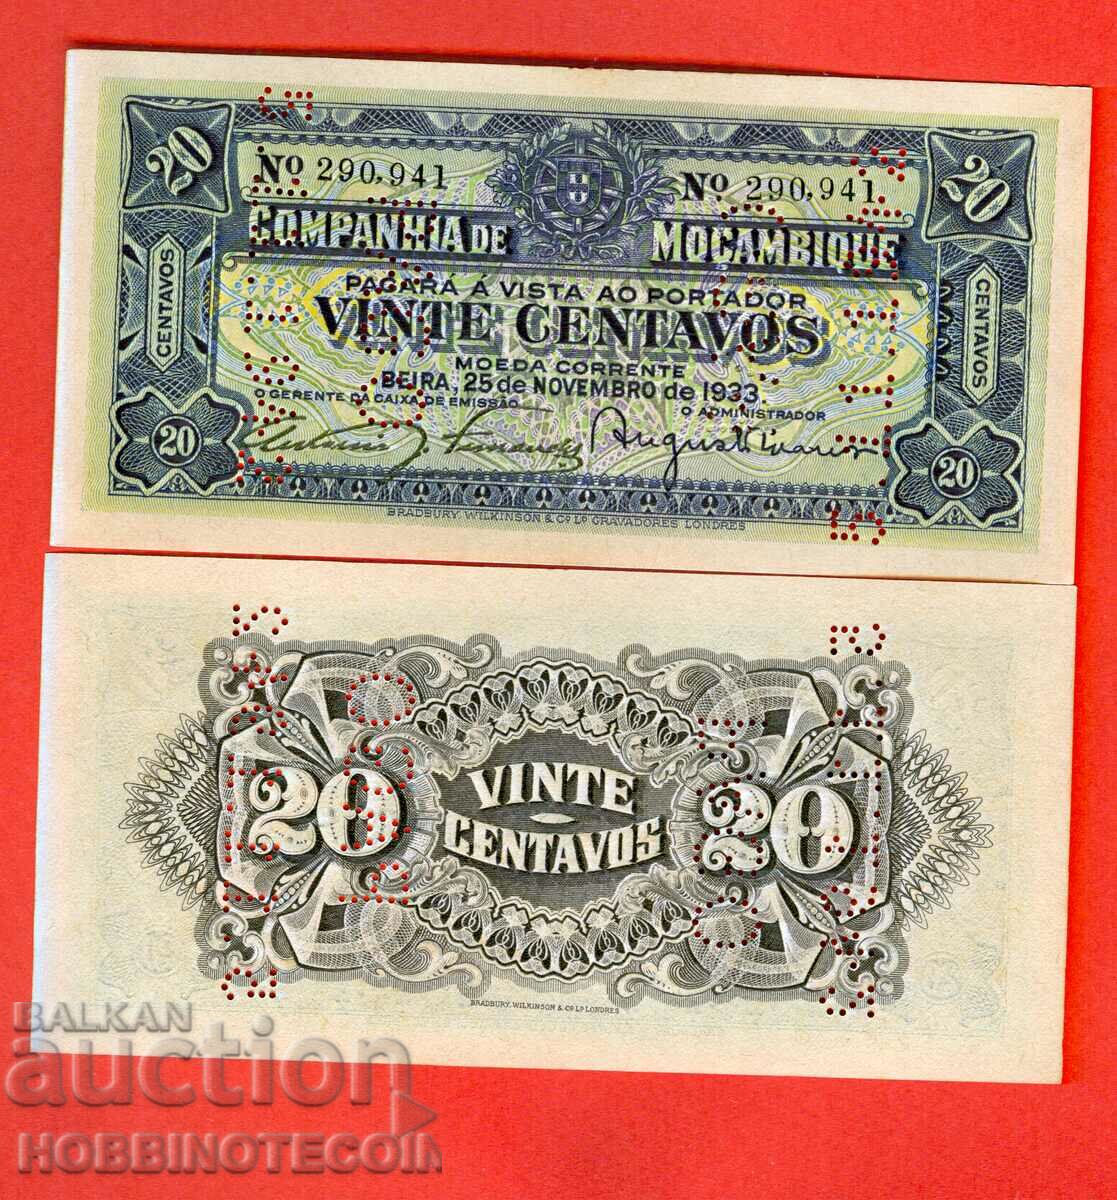 MOZAMBIQUE MOZAMBIQUE 20 issue issue 1933 NEW UNC